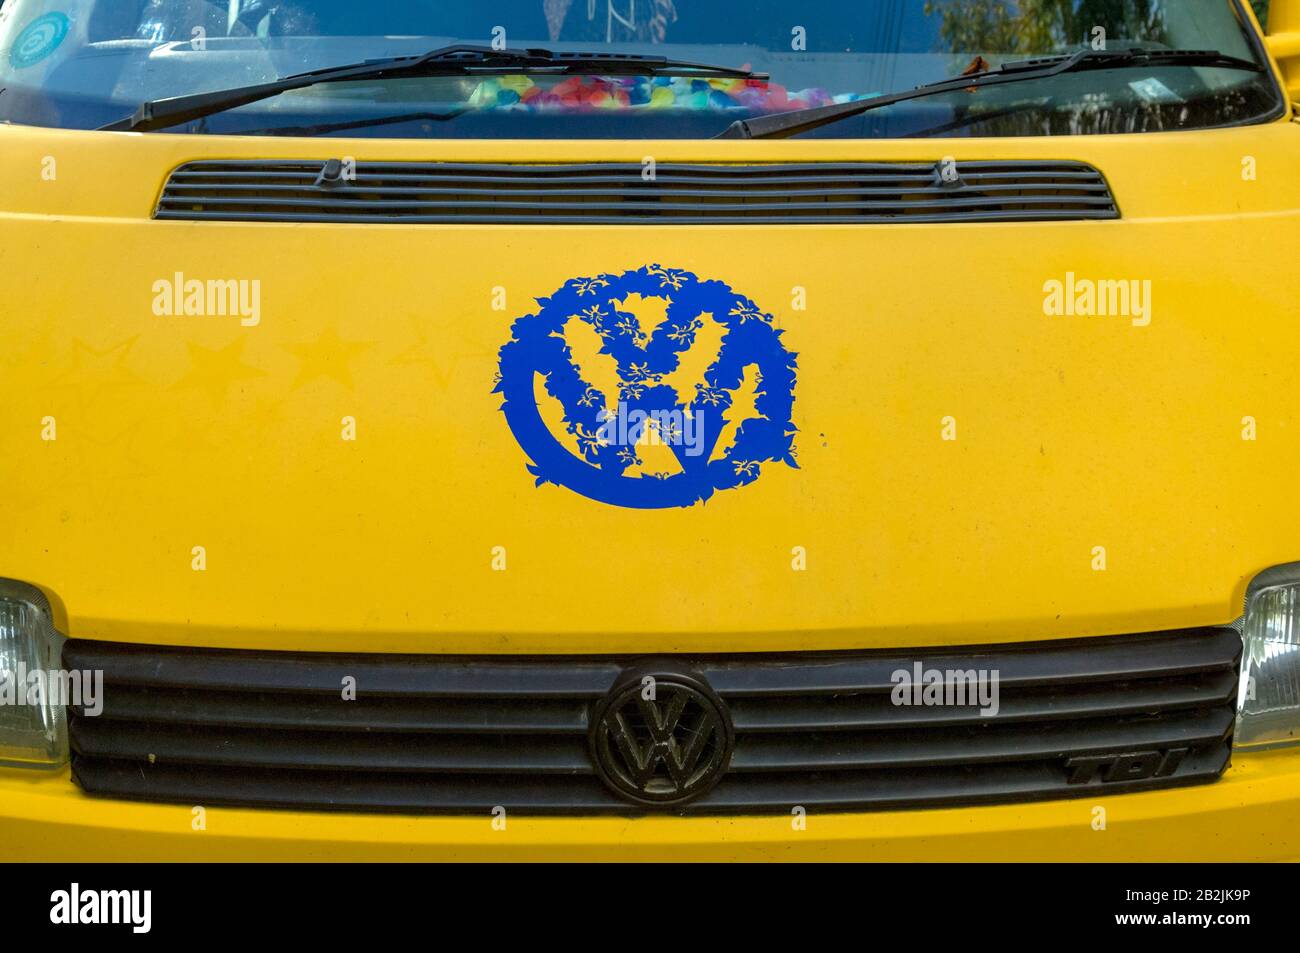 Closeup view of the front of a yellow VW camper van Stock Photo